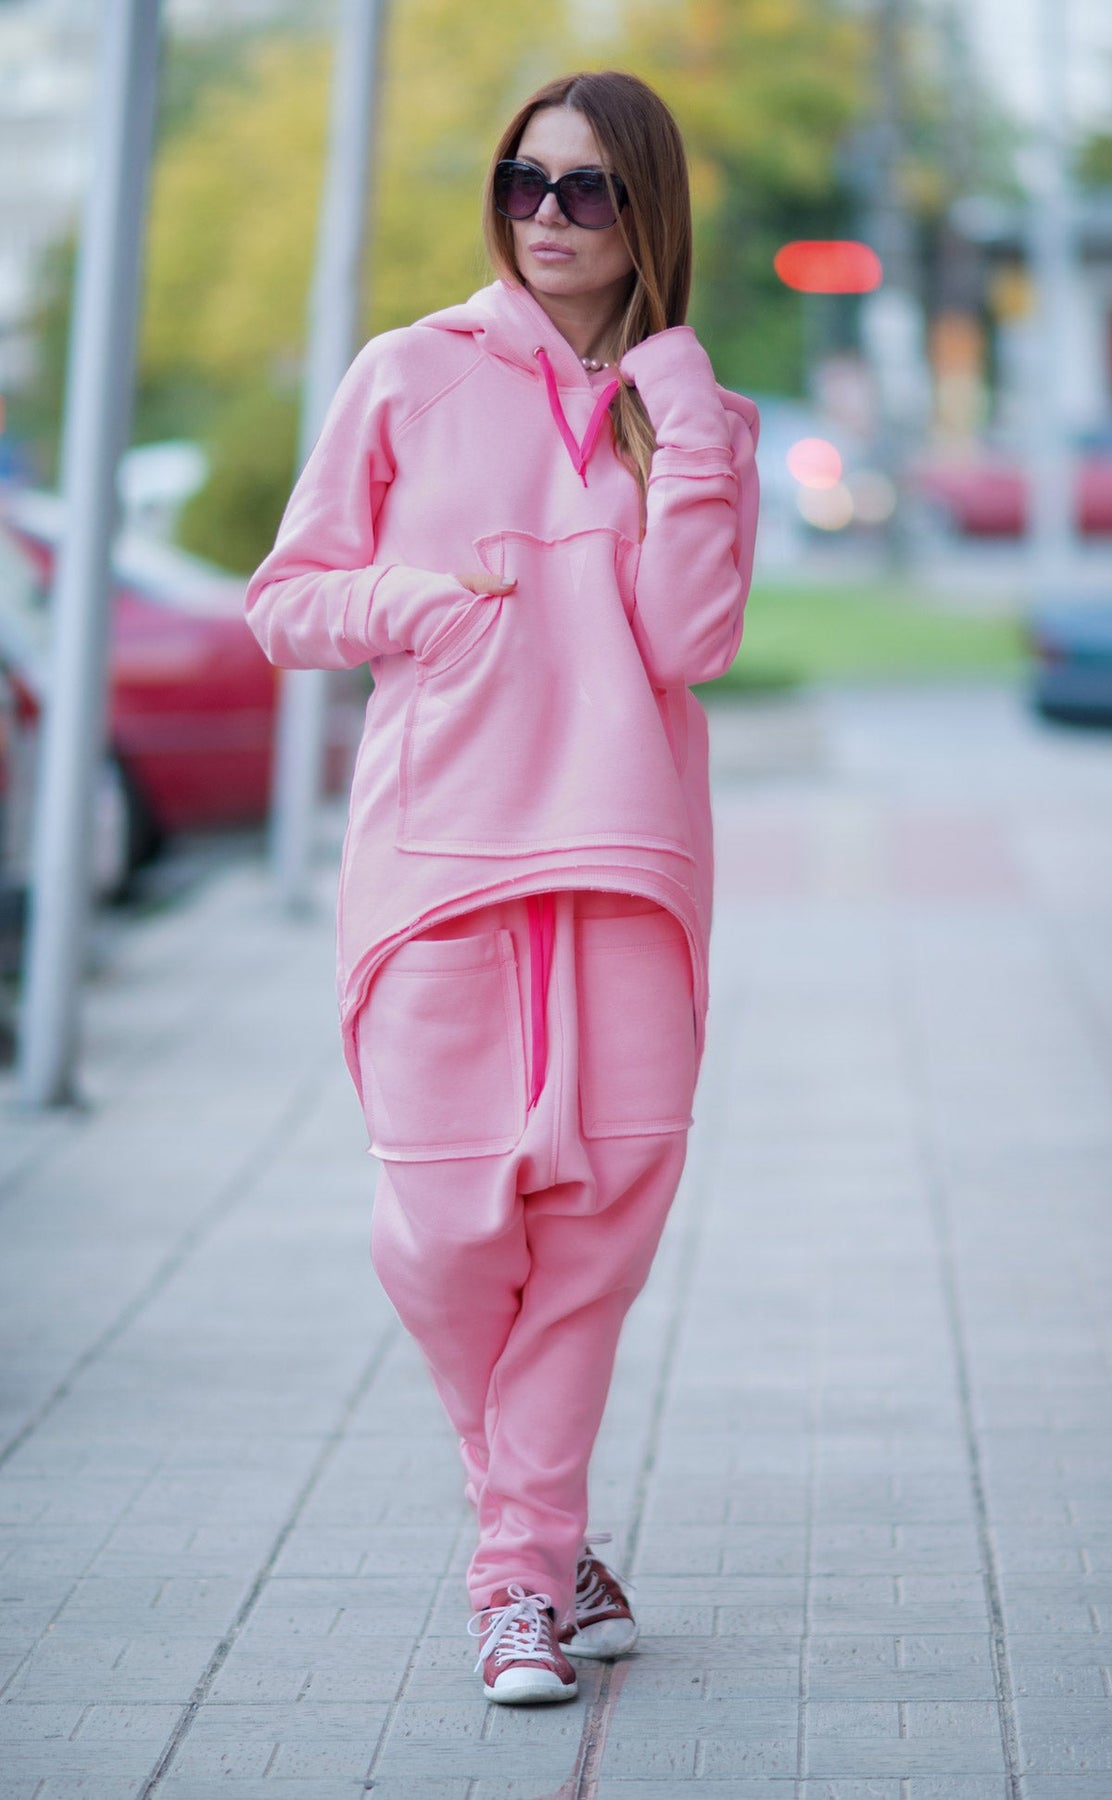 Hooded Sports Outfit – EUG FASHION